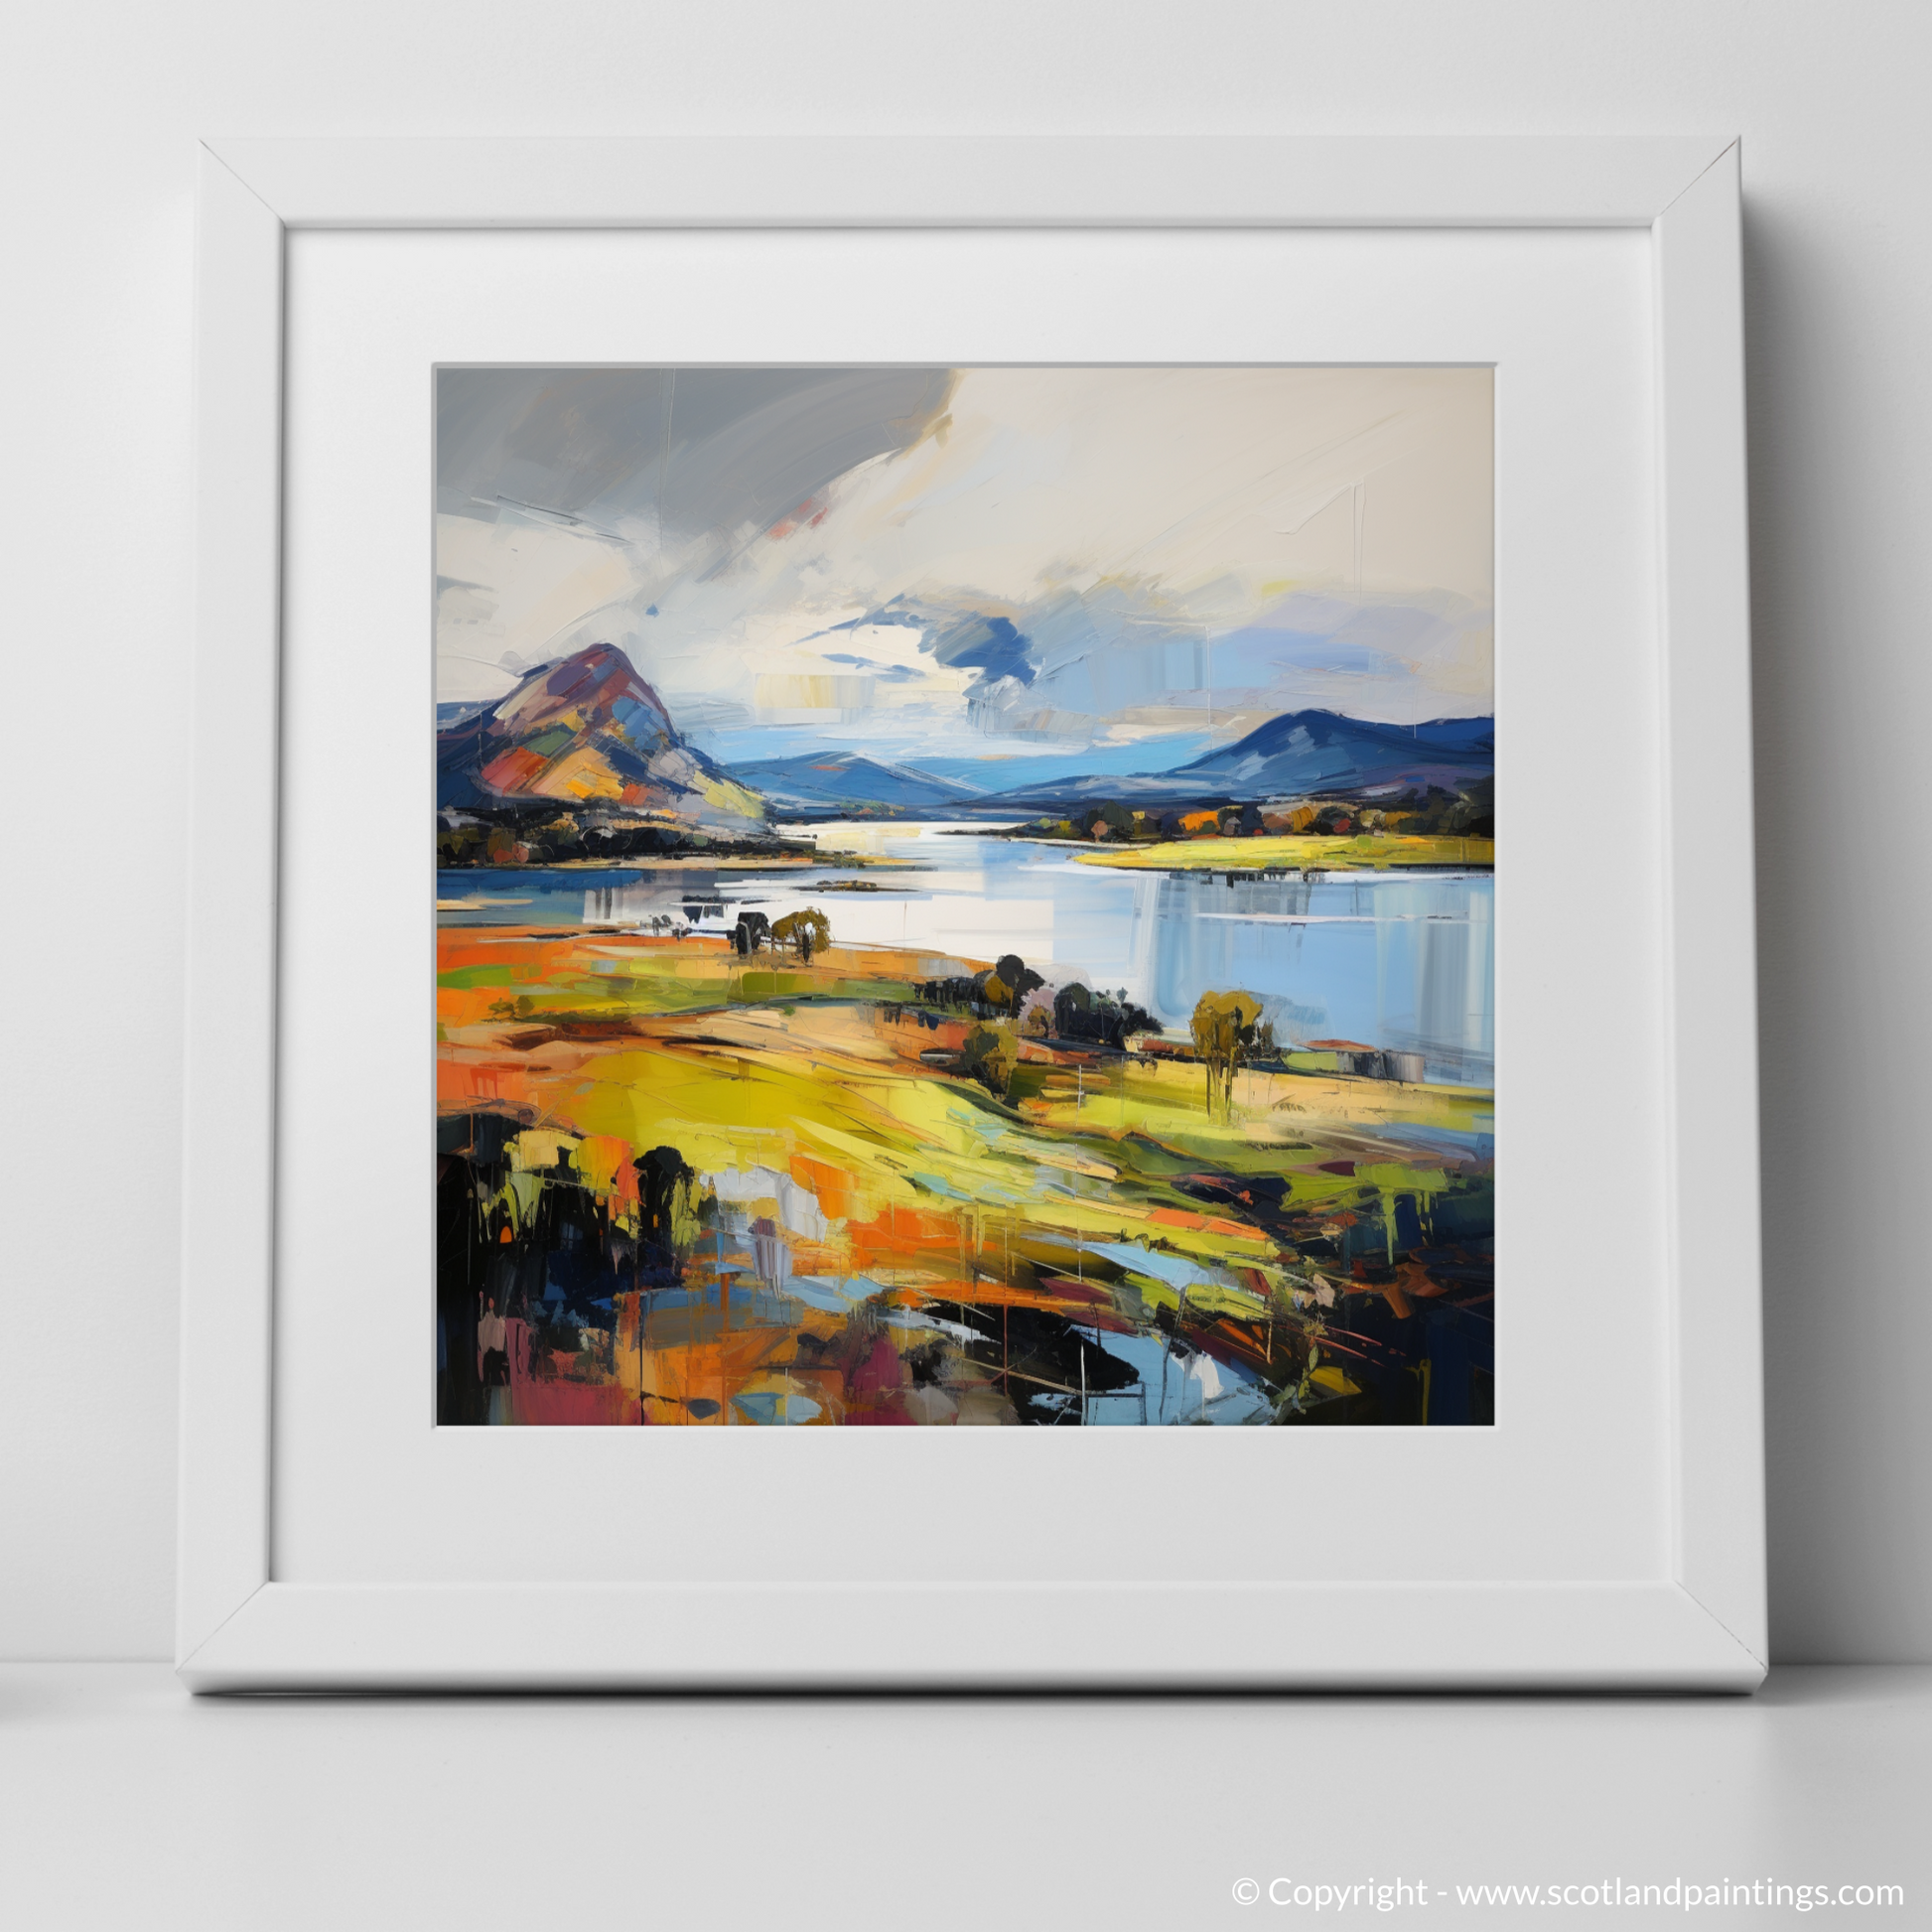 Art Print of Loch Leven, Perth and Kinross with a white frame